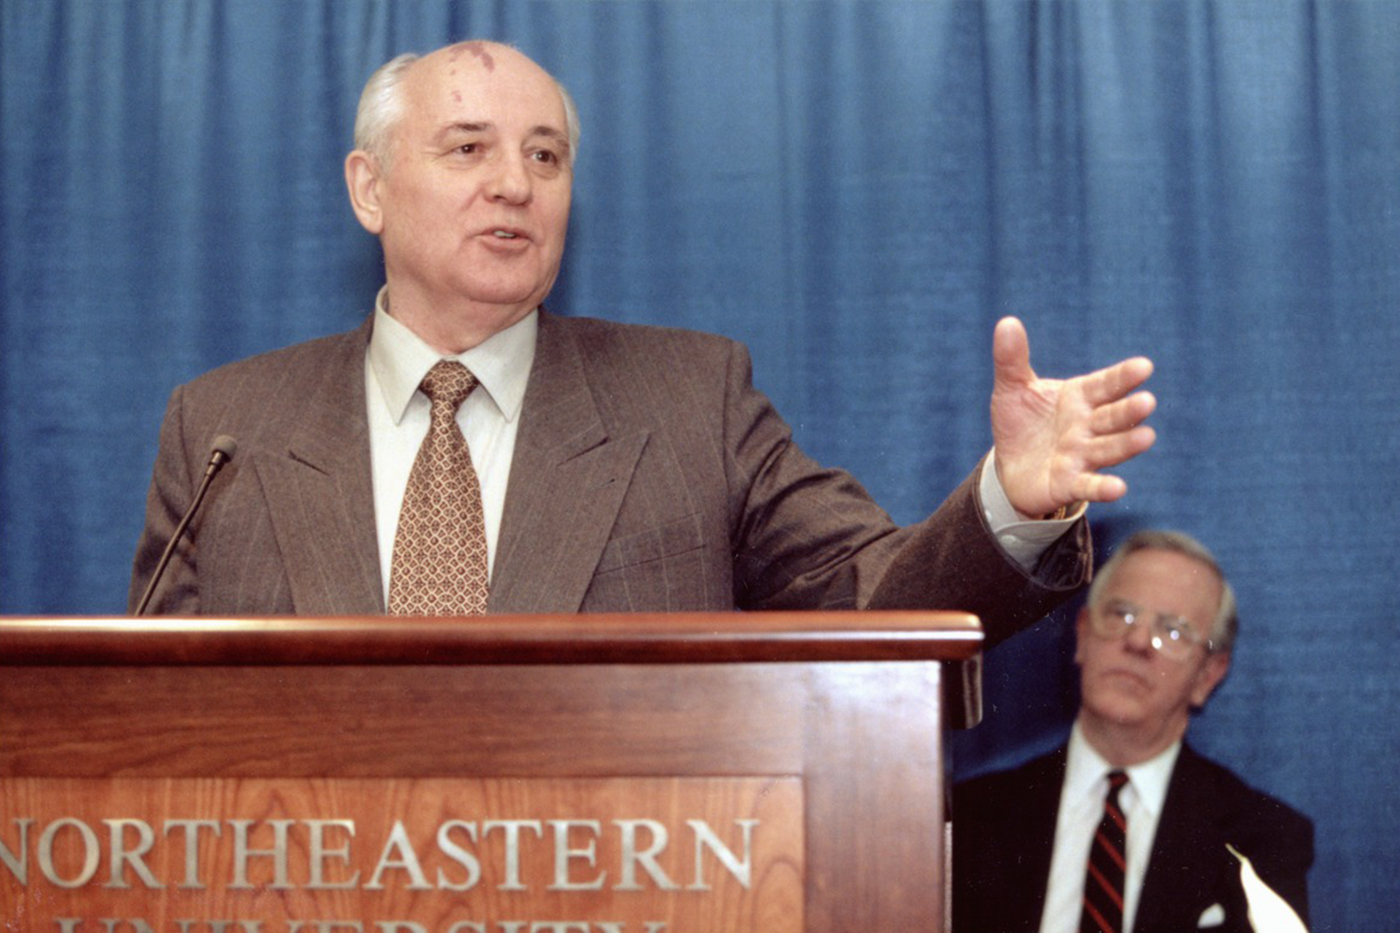 Mikhail Gorbechev stands at a podium with the words 'Northeastern University' on the front